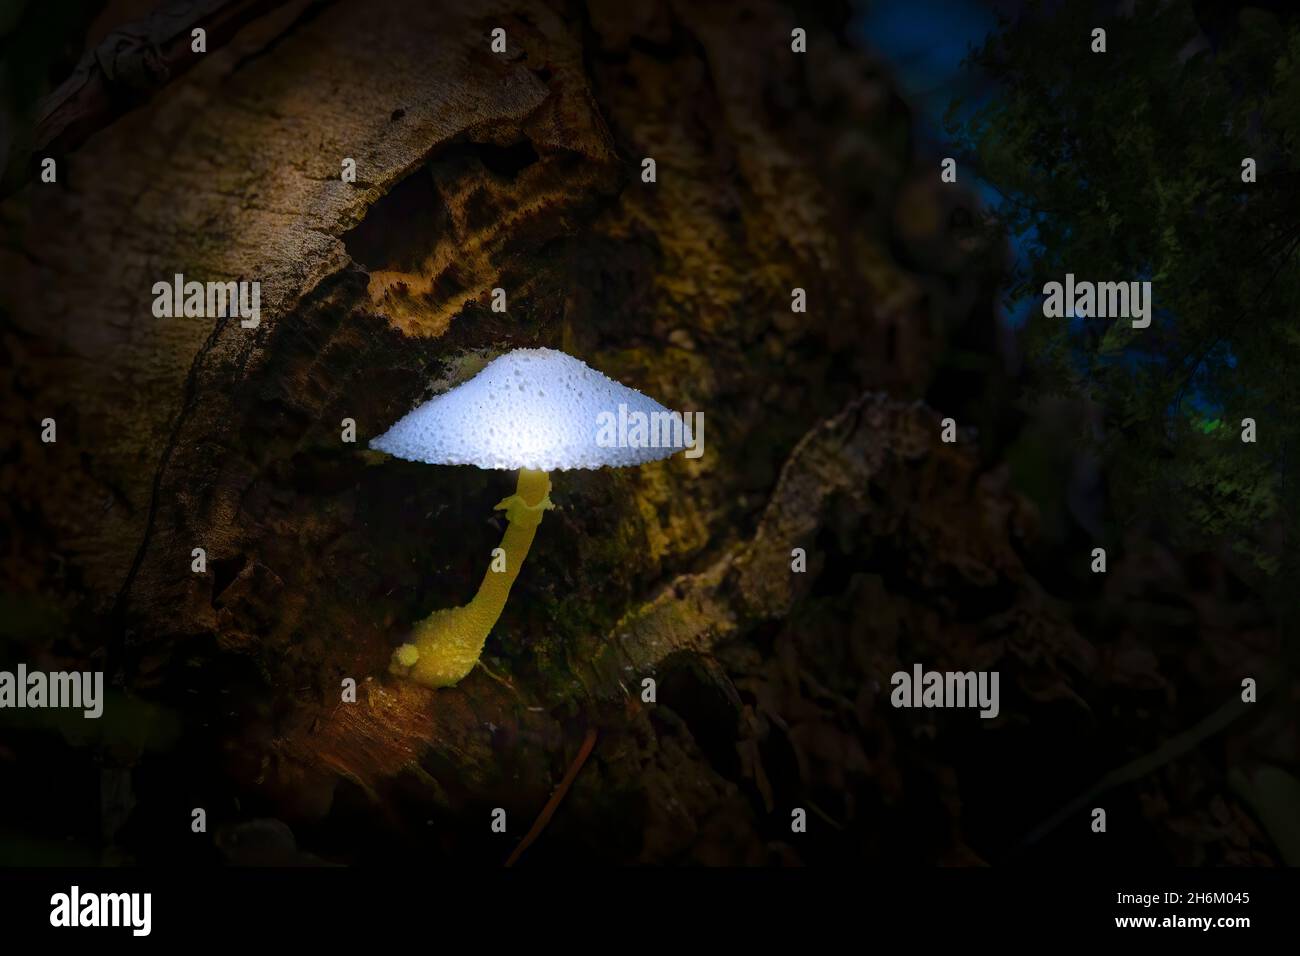 An agaricaceae mushroom growing on a fallen tree trunk seems to glow from within in the Florida Everglades. Stock Photo